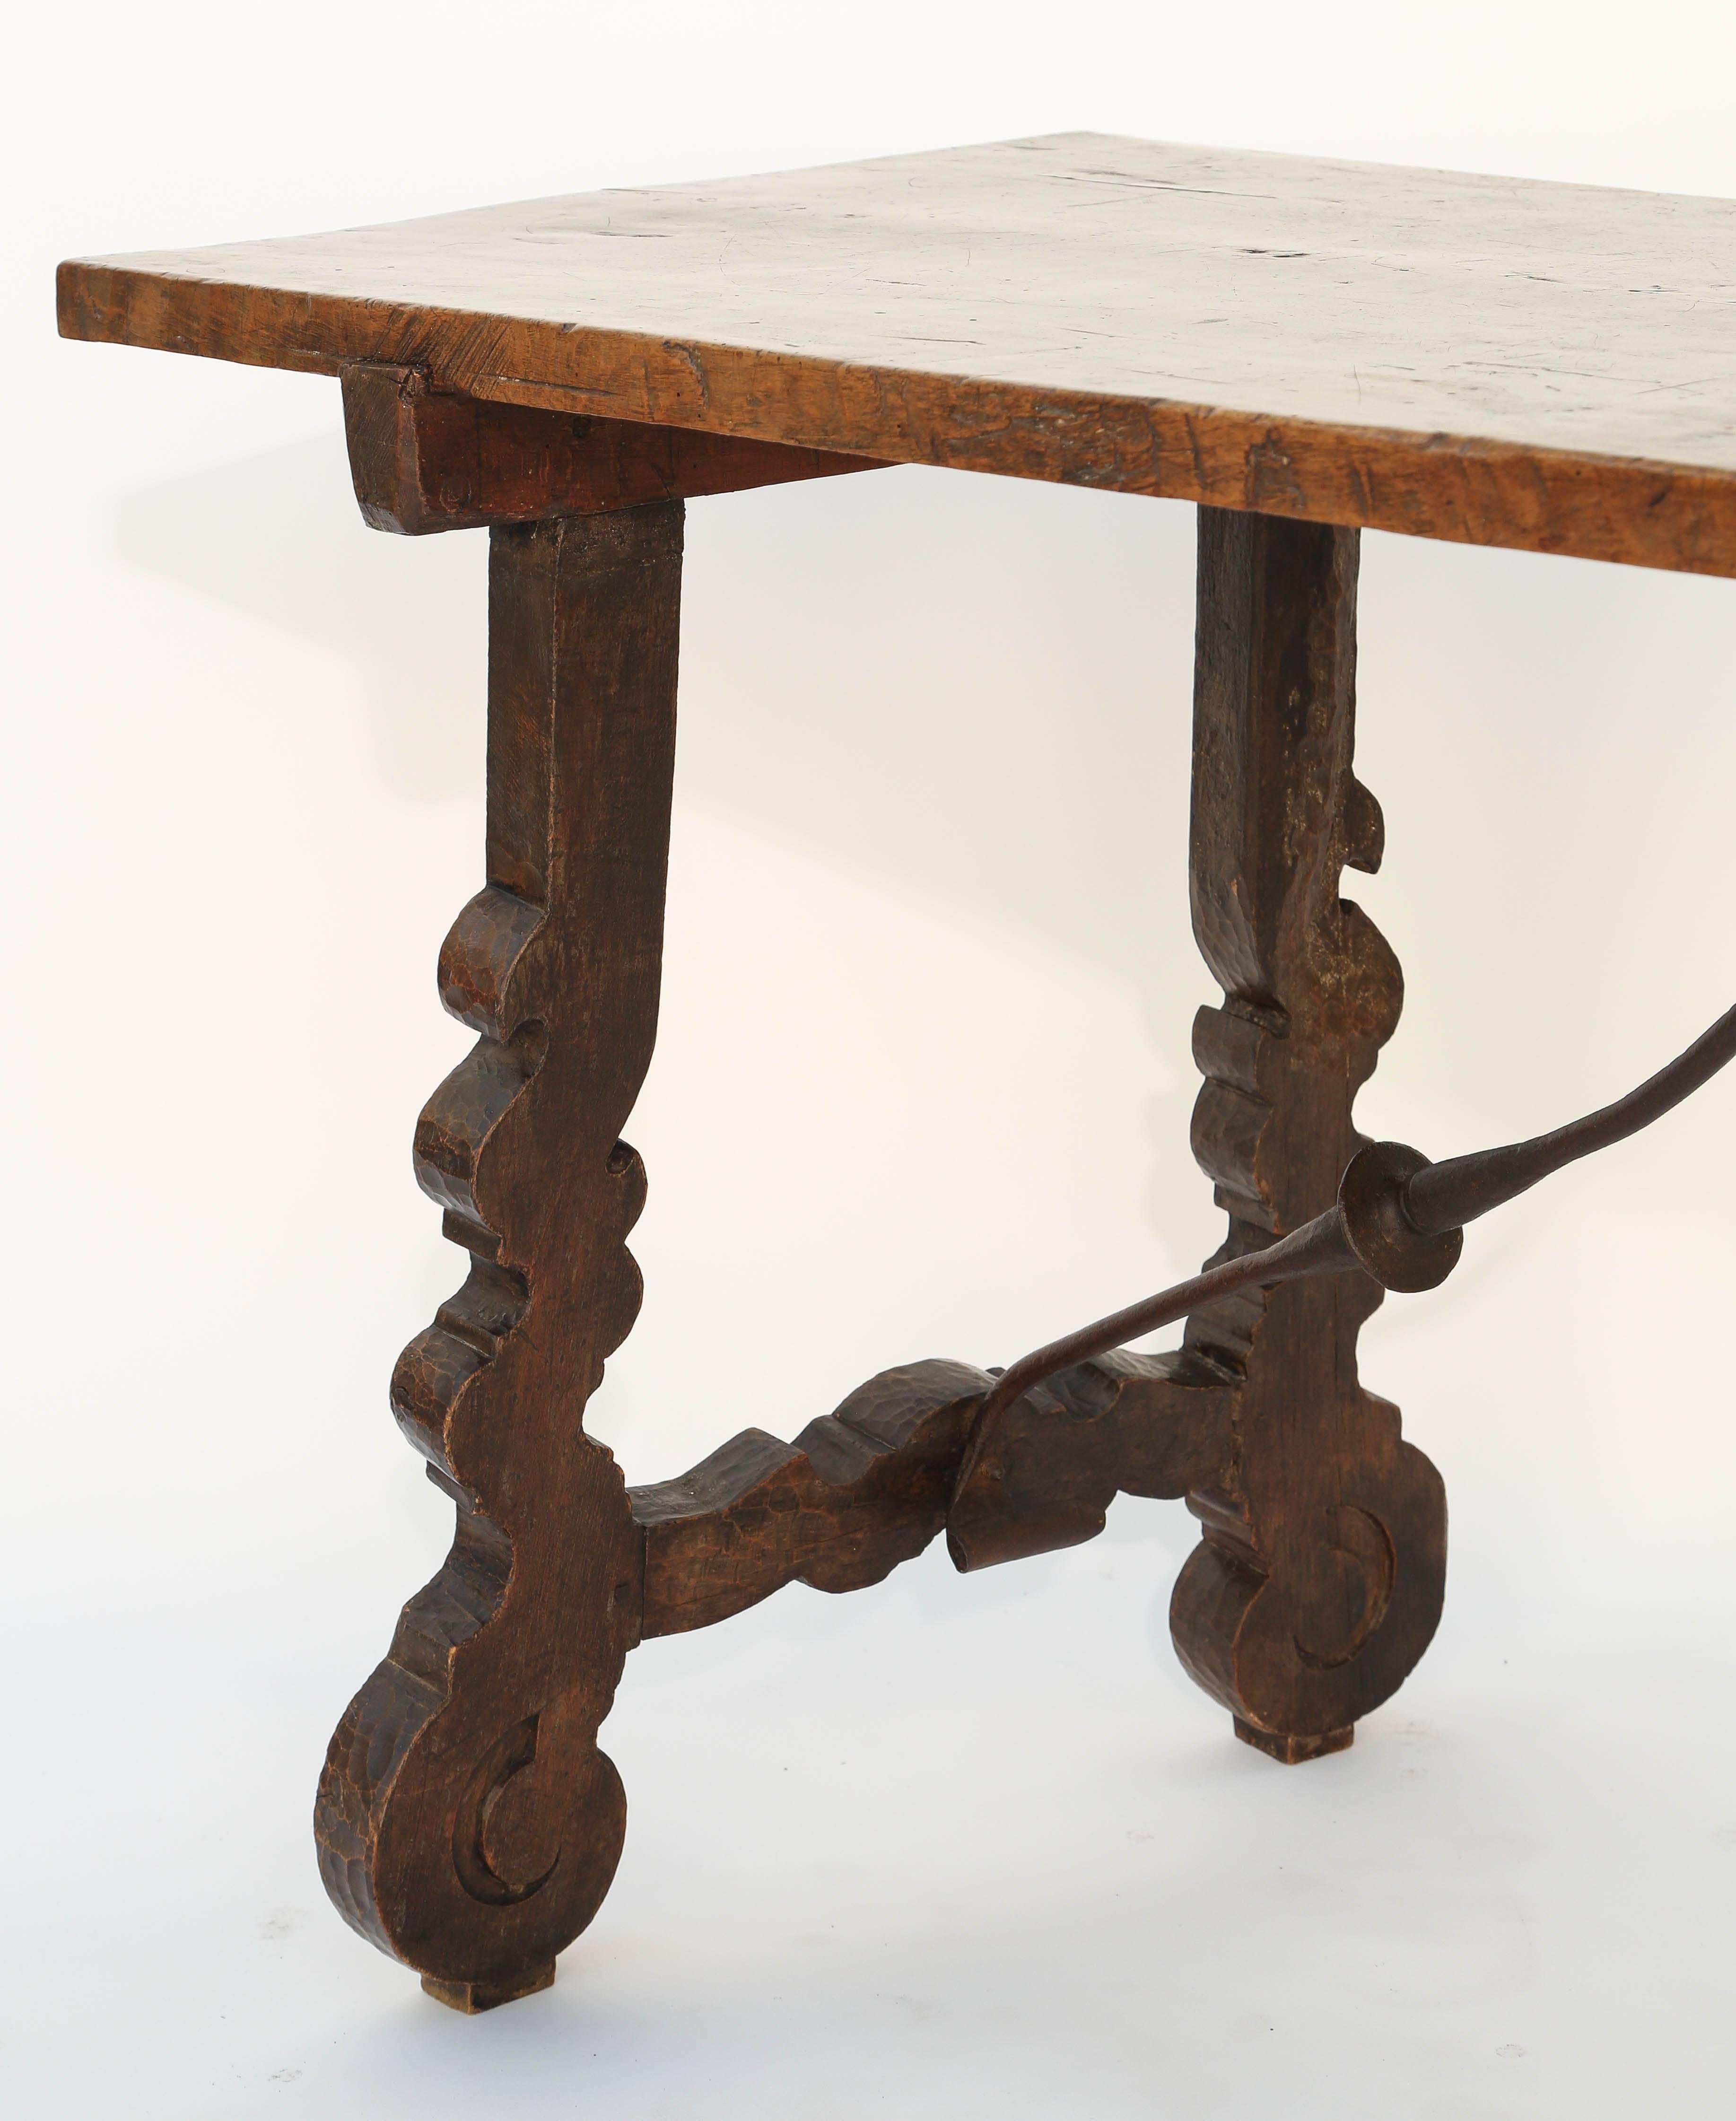 17th-18th Century Spanish Colonial Walnut Trestle Table In Good Condition For Sale In West Palm Beach, FL